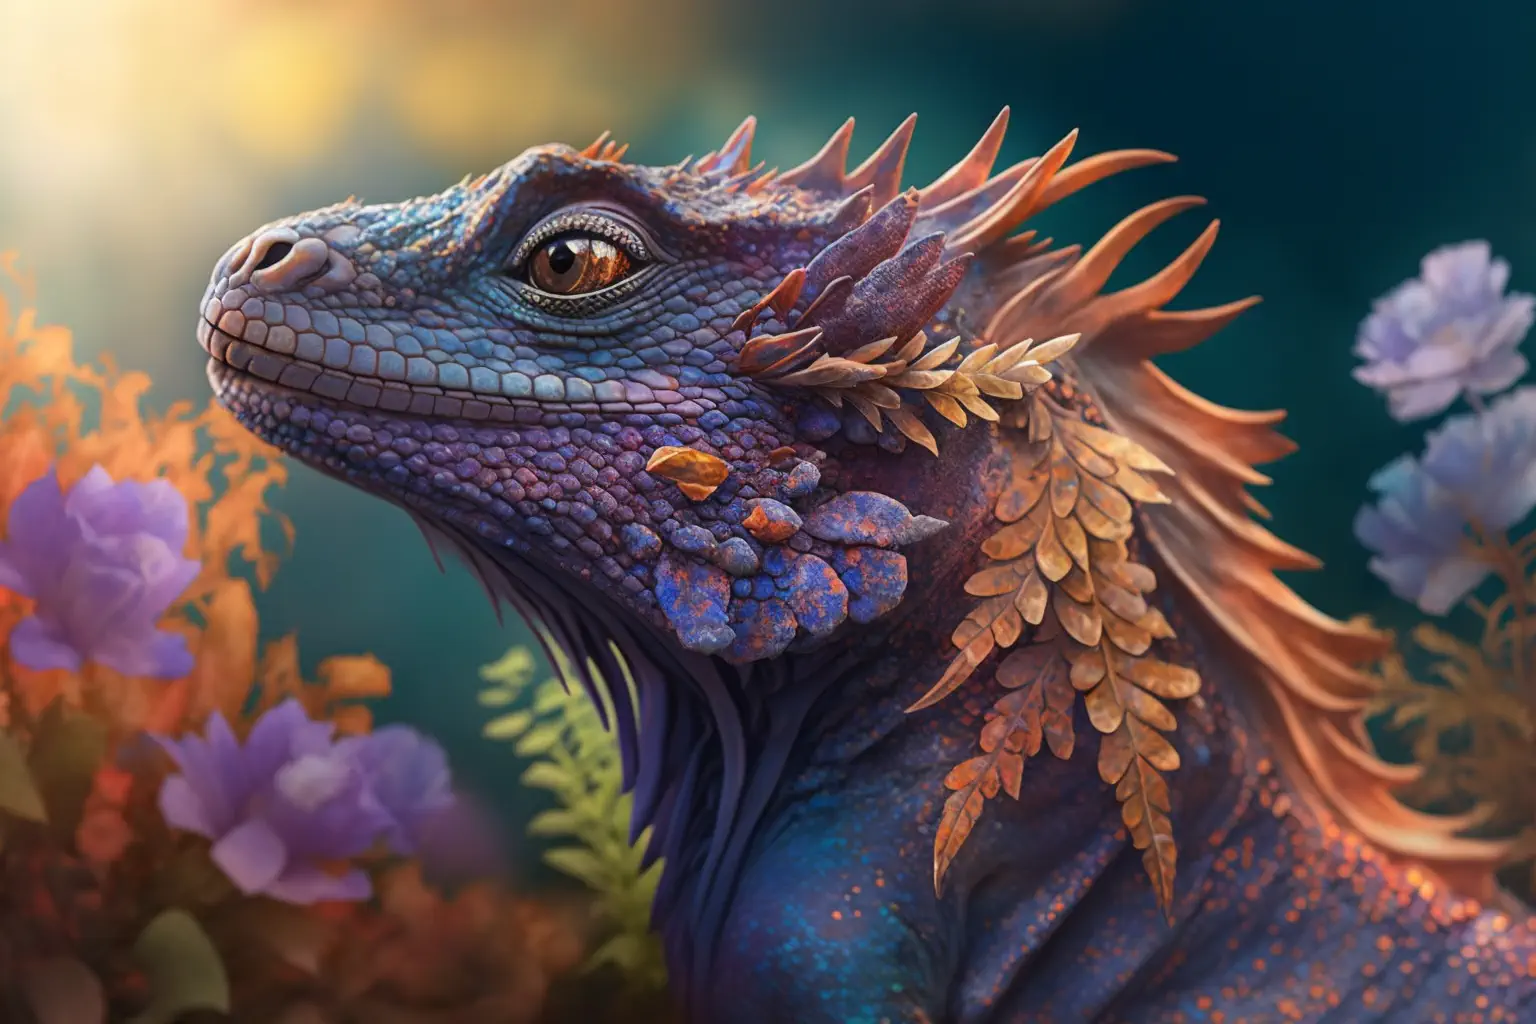 MaggyMage_portrait_a_a_young_beautiful_dragon_with_flowers_bok_cd10fca1-b1b7-466d-bd0f-e41949e6c08b